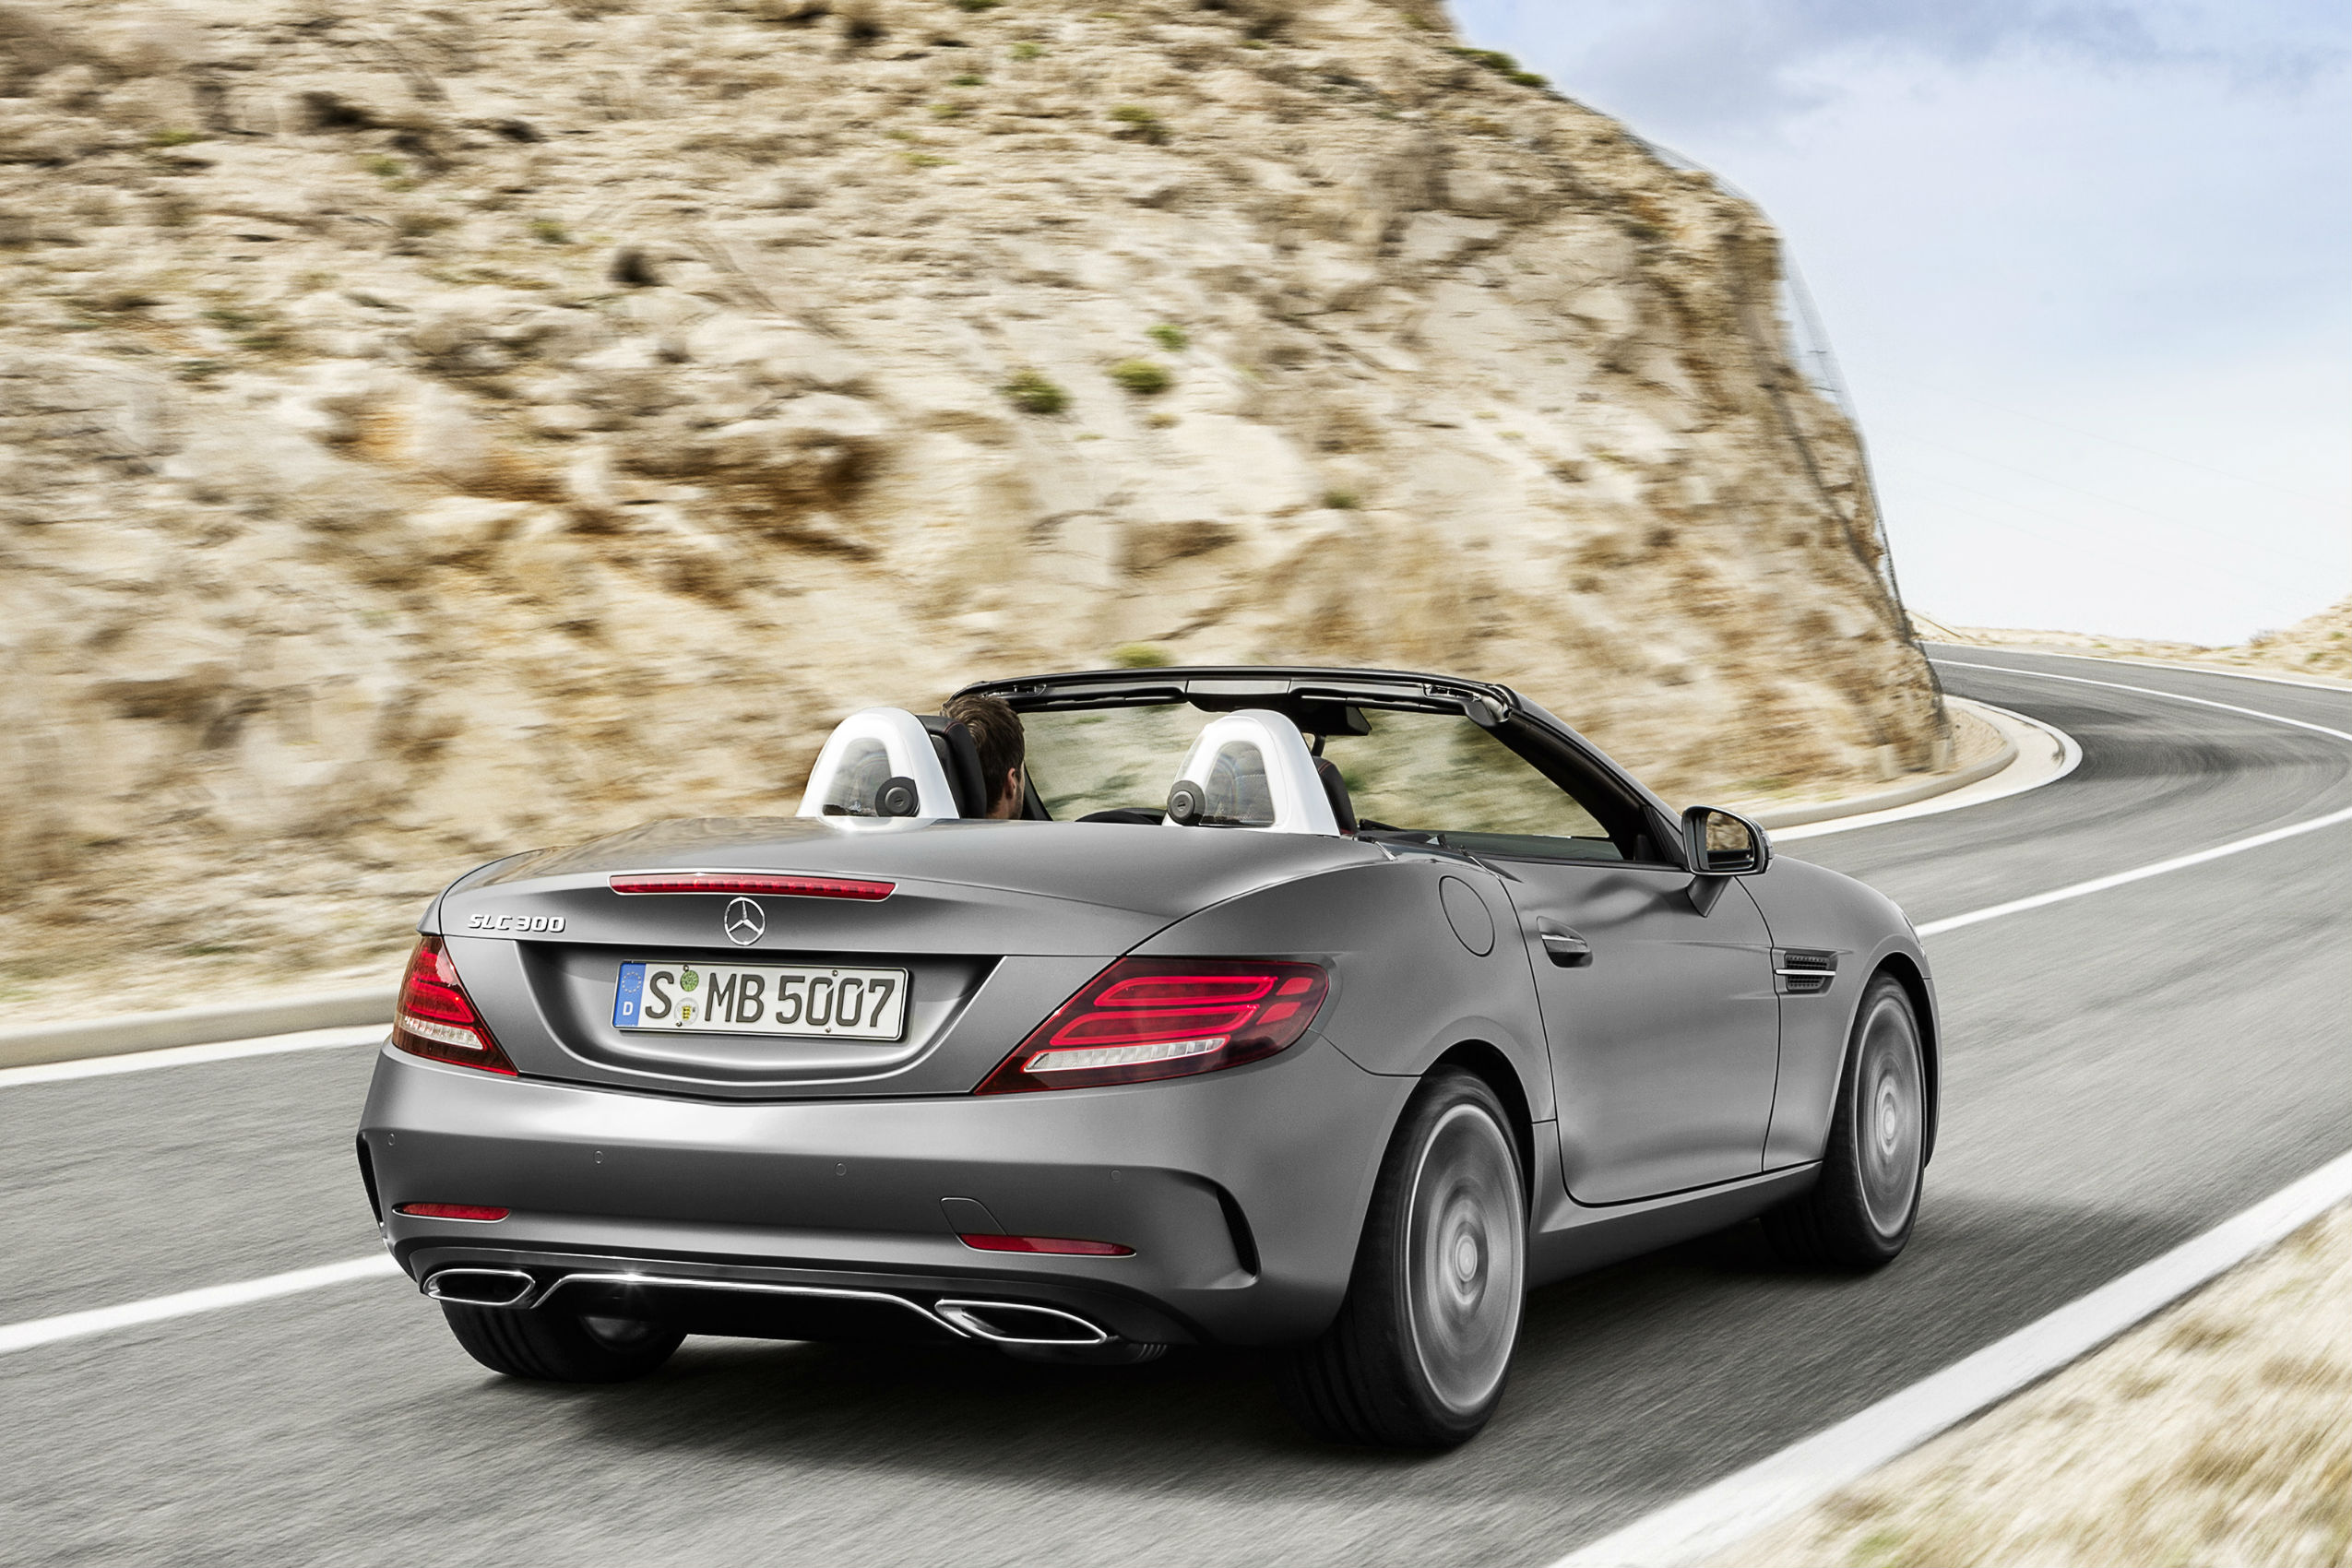 Mercedes SLC 2016 news and pictures